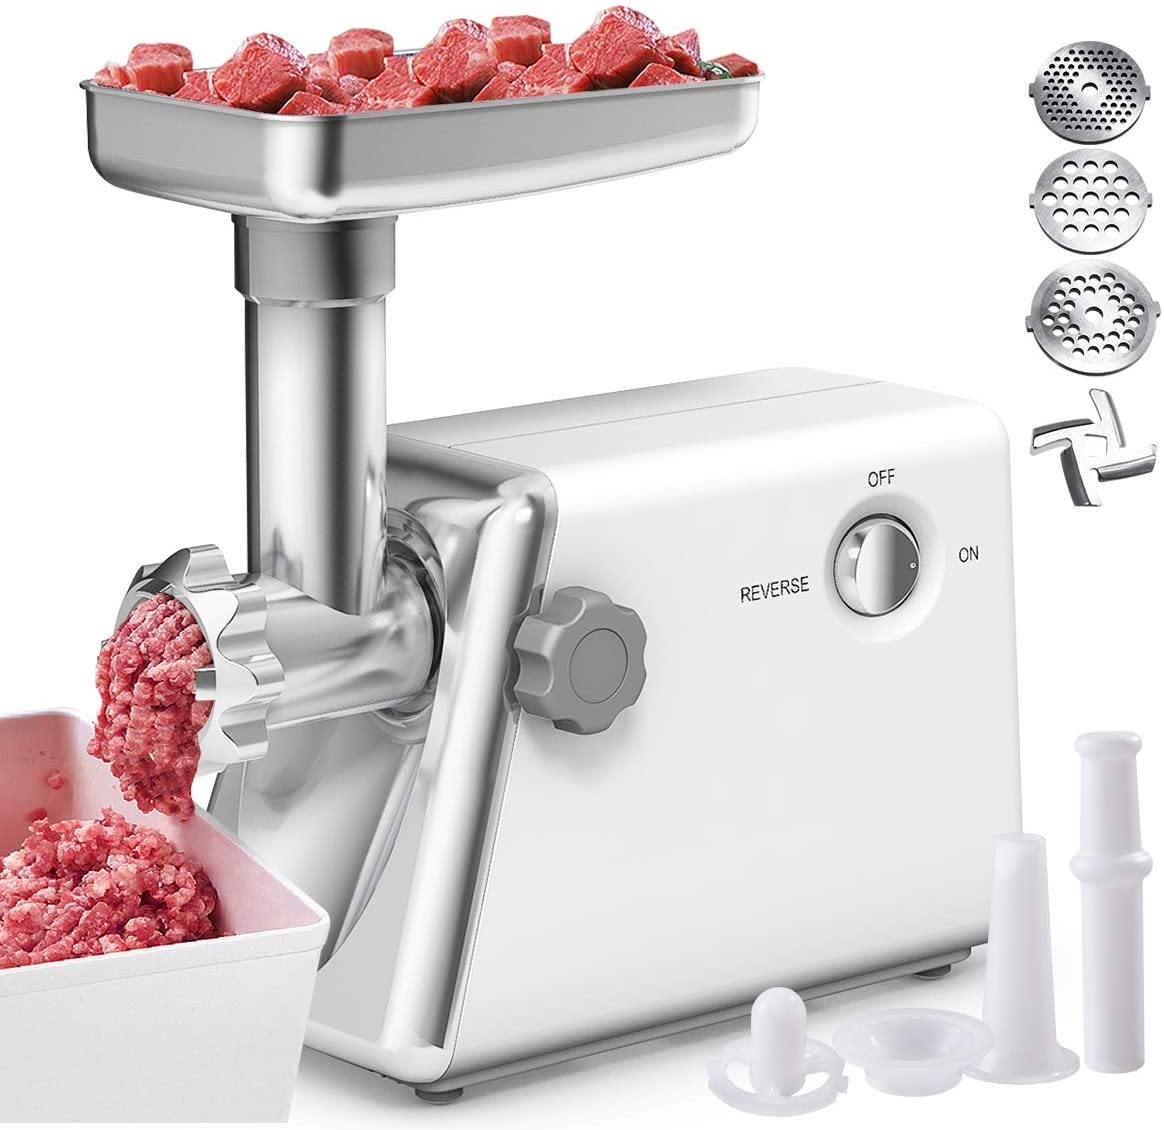 COSTWAY Electric Meat Grinder Sausage Machine Sausage Filler with Sausage Attachment Chopper Meat Grinder Biscuit / 1200 W / Metal Gearbox / 3 Perforated Discs / Stainless Steel Blade